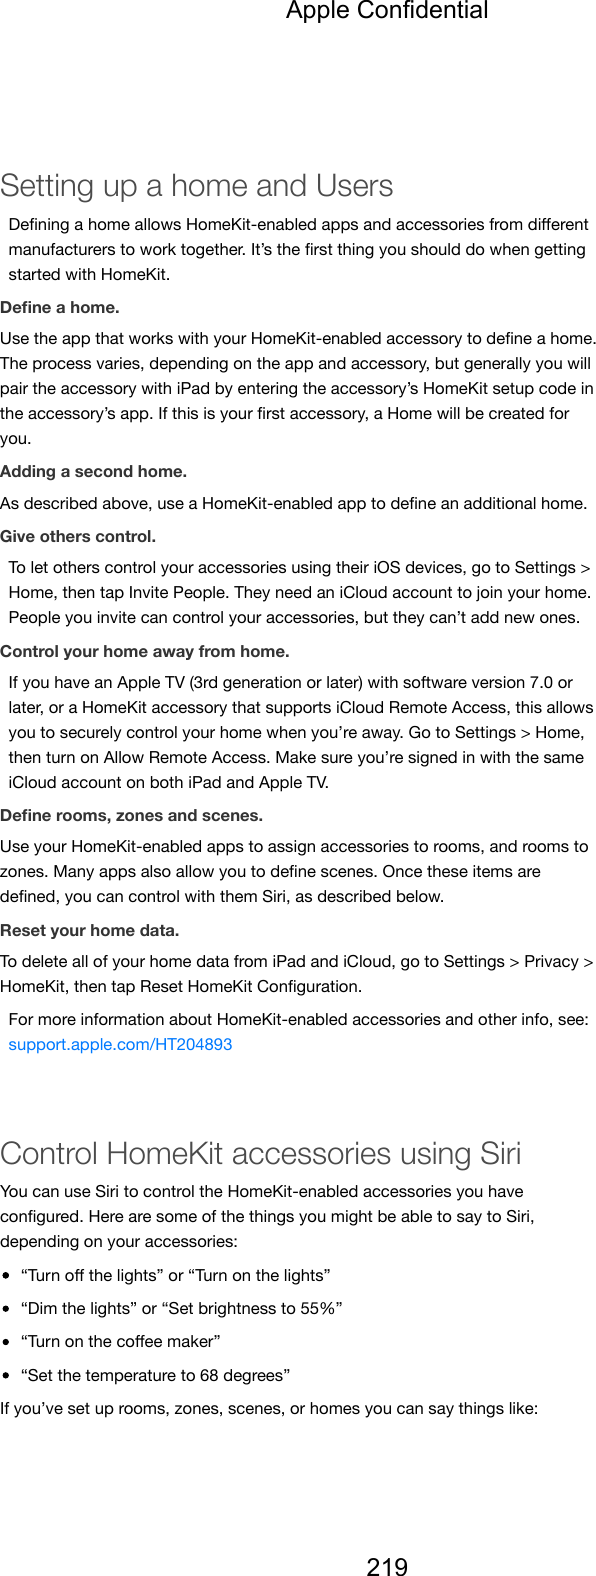 Setting up a home and UsersDeﬁning a home allows HomeKit-enabled apps and accessories from diﬀerentmanufacturers to work together. It’s the ﬁrst thing you should do when gettingstarted with HomeKit.Deﬁne a home.Use the app that works with your HomeKit-enabled accessory to deﬁne a home.The process varies, depending on the app and accessory, but generally you willpair the accessory with iPad by entering the accessory’s HomeKit setup code inthe accessory’s app. If this is your ﬁrst accessory, a Home will be created foryou.Adding a second home.As described above, use a HomeKit-enabled app to deﬁne an additional home.Give others control.To let others control your accessories using their iOS devices, go to Settings &gt;Home, then tap Invite People. They need an iCloud account to join your home.People you invite can control your accessories, but they can’t add new ones.Control your home away from home.If you have an Apple TV (3rd generation or later) with software version 7.0 orlater, or a HomeKit accessory that supports iCloud Remote Access, this allowsyou to securely control your home when you’re away. Go to Settings &gt; Home,then turn on Allow Remote Access. Make sure you’re signed in with the sameiCloud account on both iPad and Apple TV.Deﬁne rooms, zones and scenes.Use your HomeKit-enabled apps to assign accessories to rooms, and rooms tozones. Many apps also allow you to deﬁne scenes. Once these items aredeﬁned, you can control with them Siri, as described below.Reset your home data.To delete all of your home data from iPad and iCloud, go to Settings &gt; Privacy &gt;HomeKit, then tap Reset HomeKit Conﬁguration.For more information about HomeKit-enabled accessories and other info, see:support.apple.com/HT204893Control HomeKit accessories using SiriYou can use Siri to control the HomeKit-enabled accessories you haveconﬁgured. Here are some of the things you might be able to say to Siri,depending on your accessories:“Turn oﬀ the lights” or “Turn on the lights”“Dim the lights” or “Set brightness to 55%”“Turn on the coﬀee maker”“Set the temperature to 68 degrees”If you’ve set up rooms, zones, scenes, or homes you can say things like:Apple Confidential219